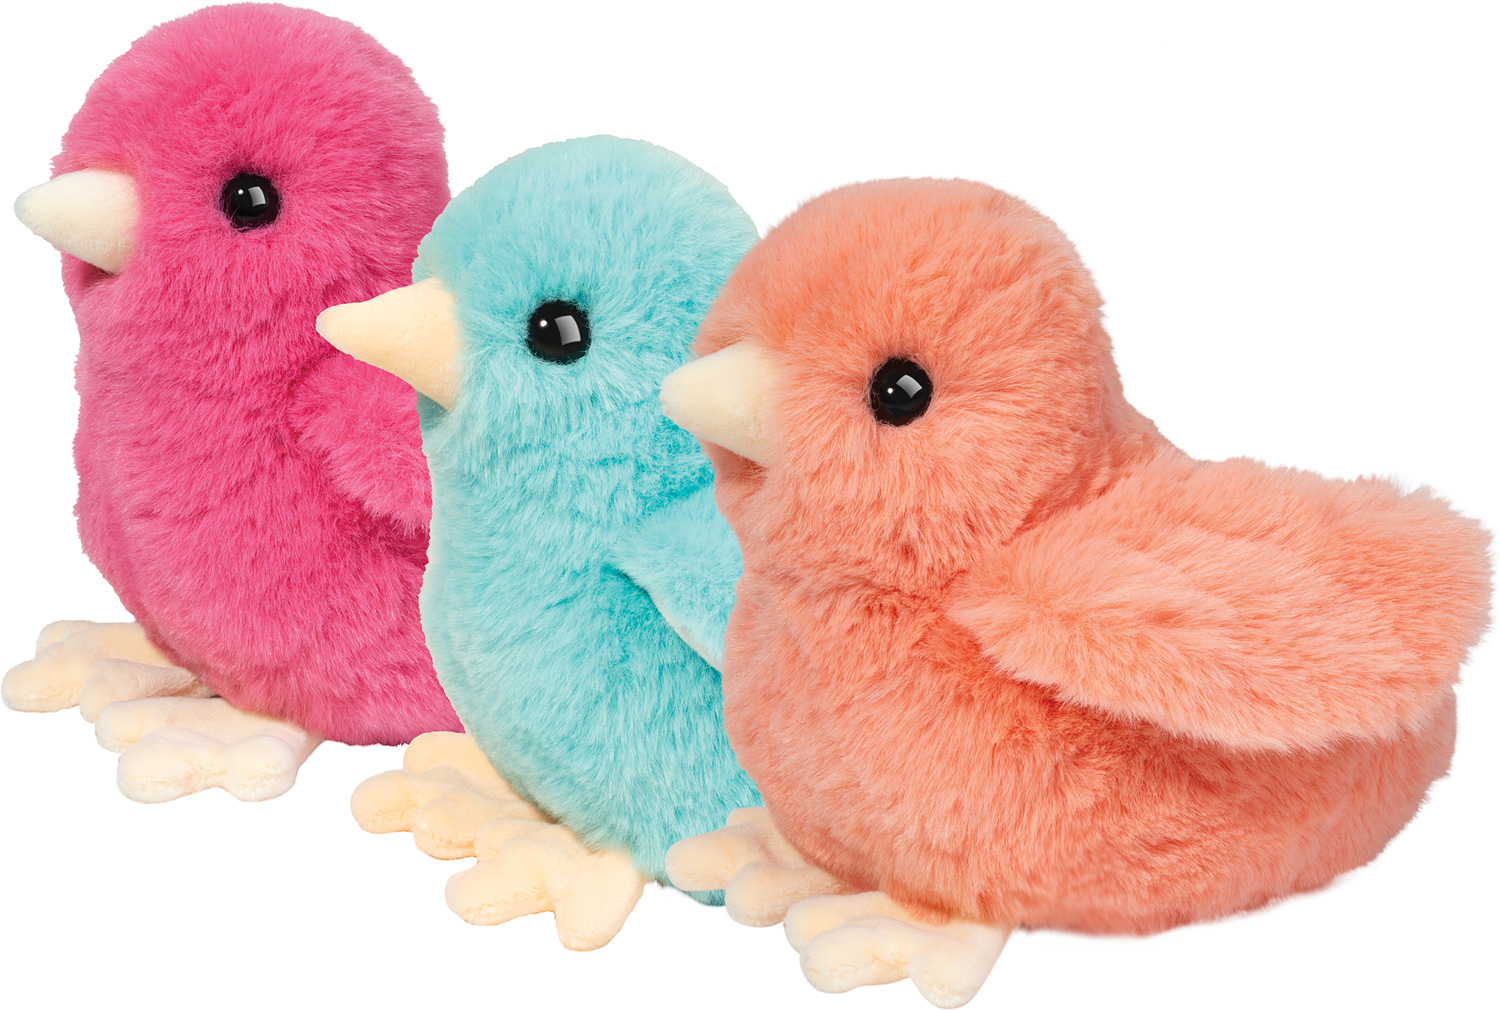 Colorful Chicks - Pink